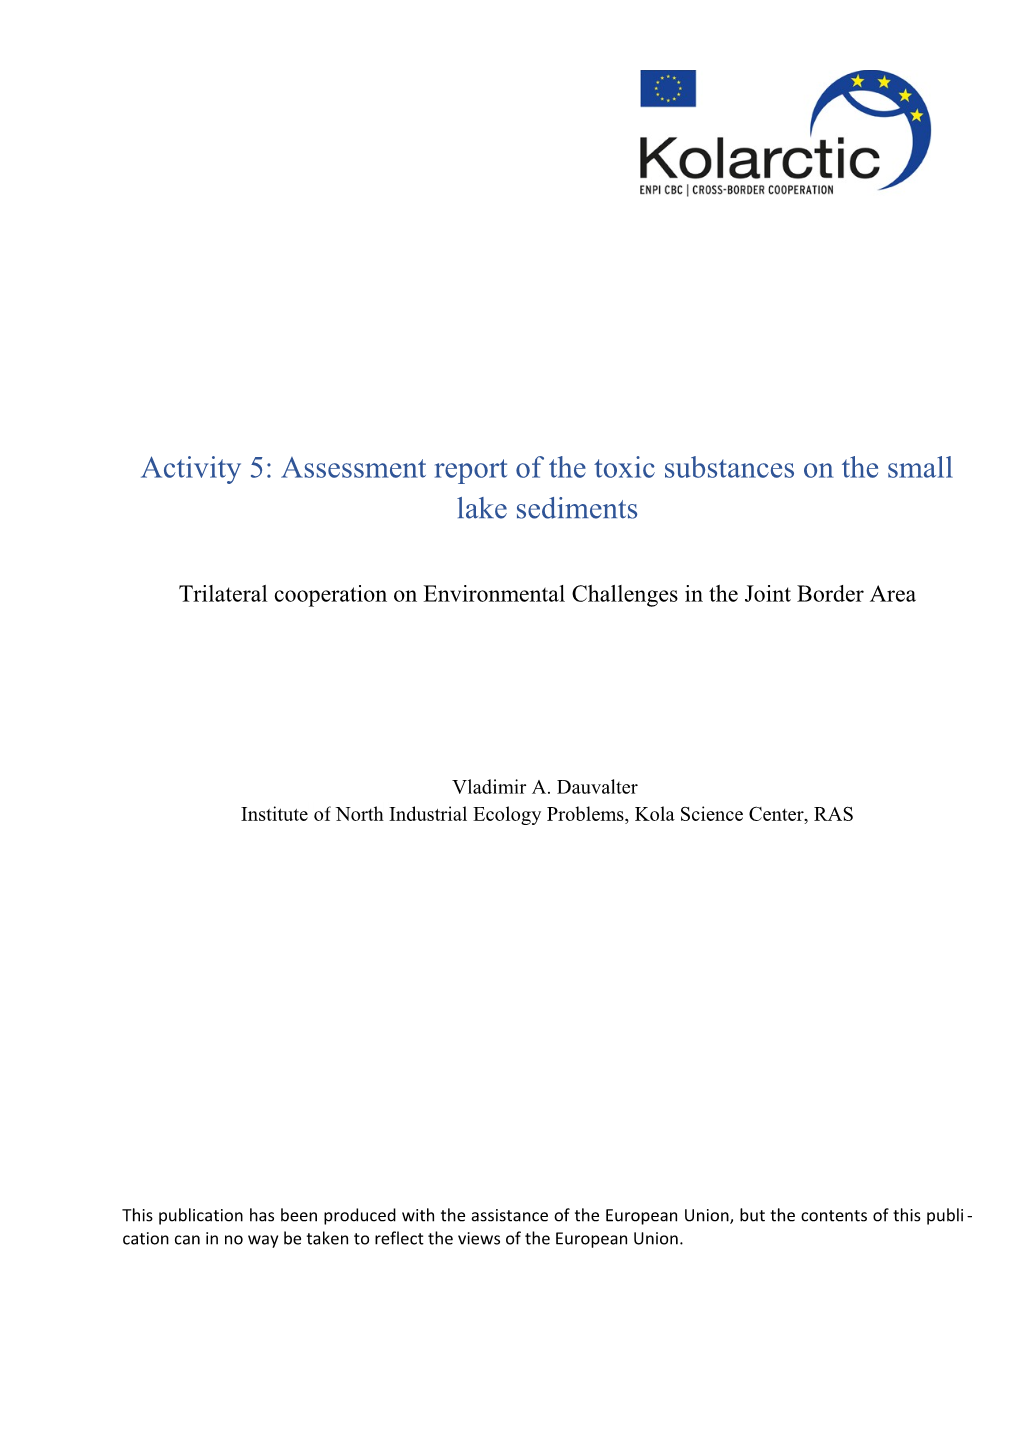 Activity 5: Assessment Report of the Toxic Substances on the Small Lake Sediments